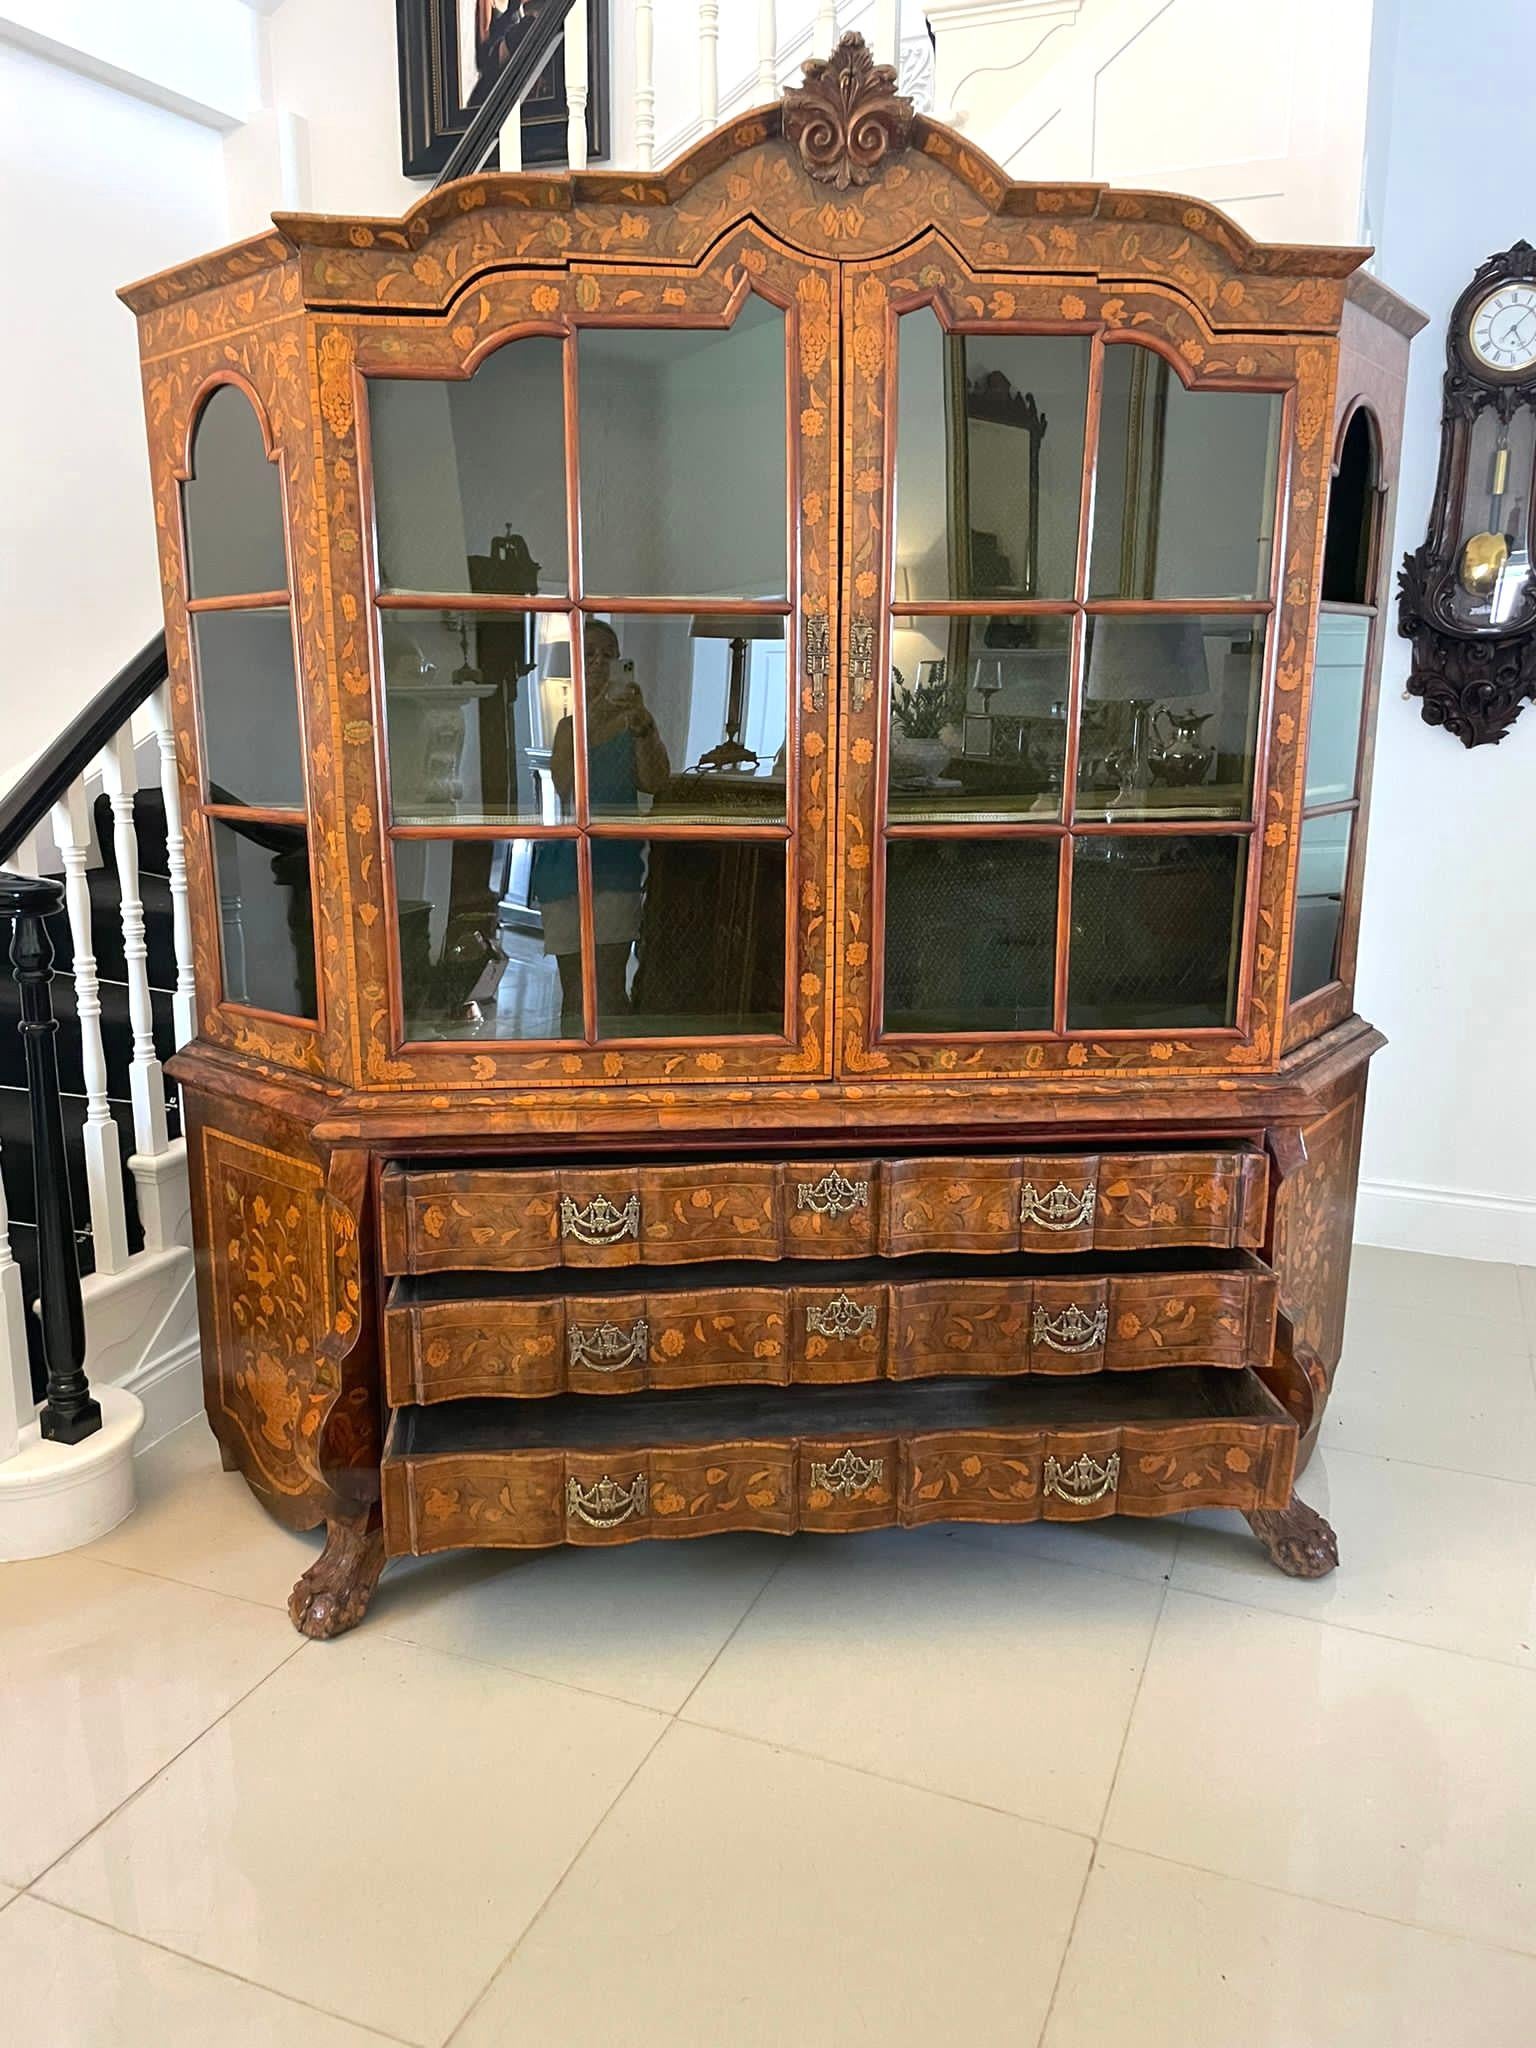 Extremely large antique early 19th century quality burr walnut Dutch floral marquetry inlaid display cabinet having a shaped marquetry inlaid and carved cornice above a pair of astral glazed floral marquetry doors opening to reveal two display